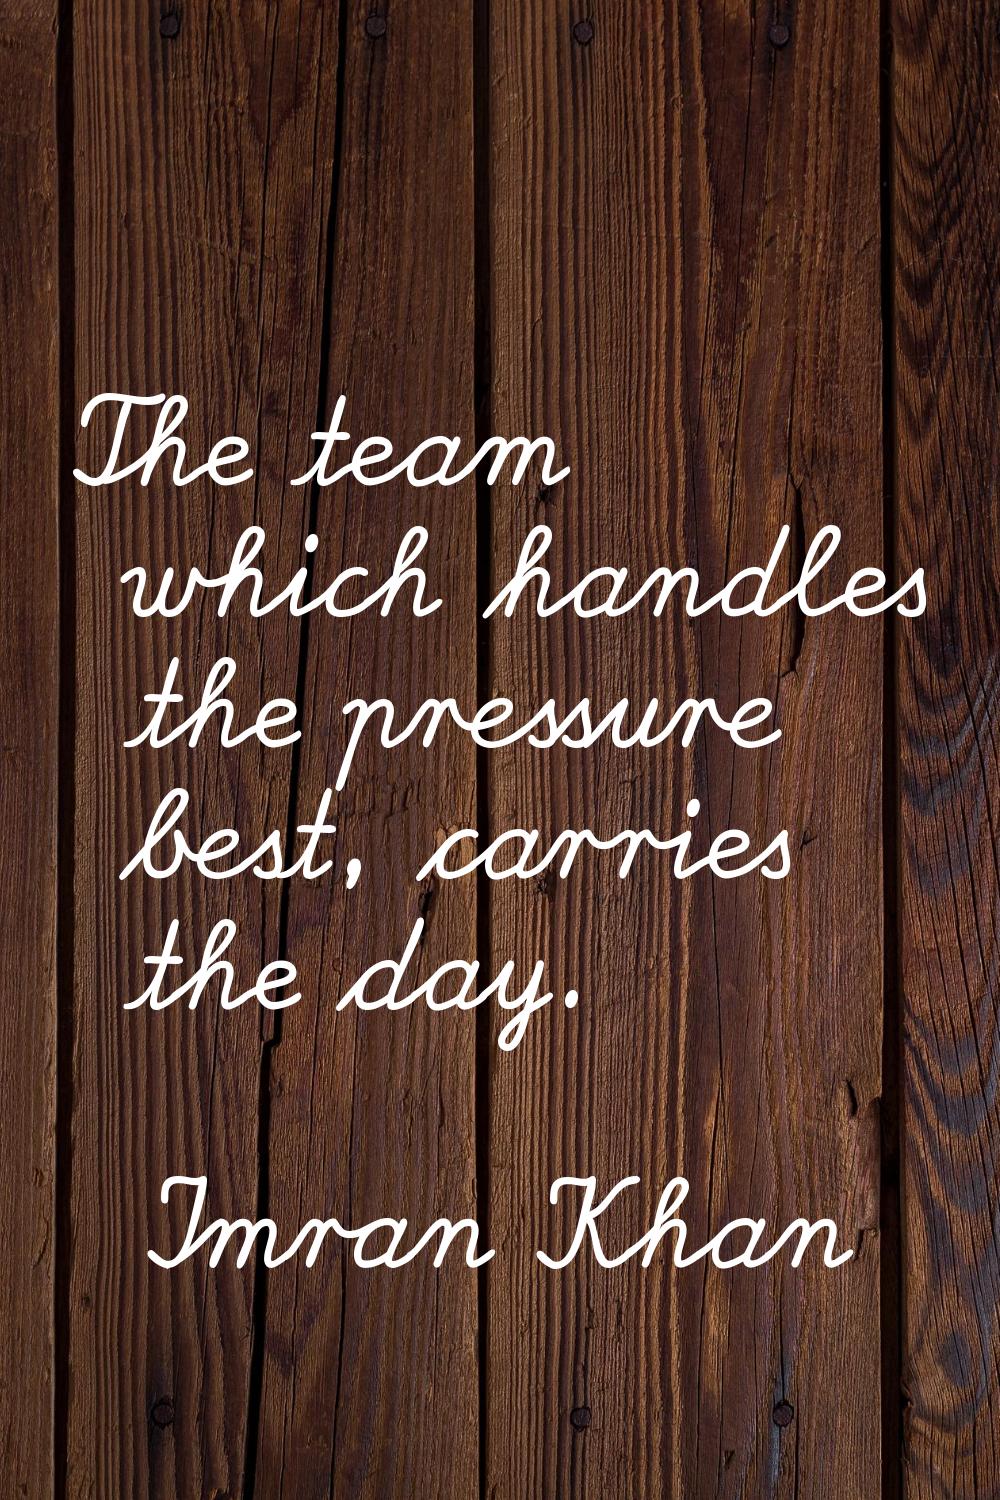 The team which handles the pressure best, carries the day.